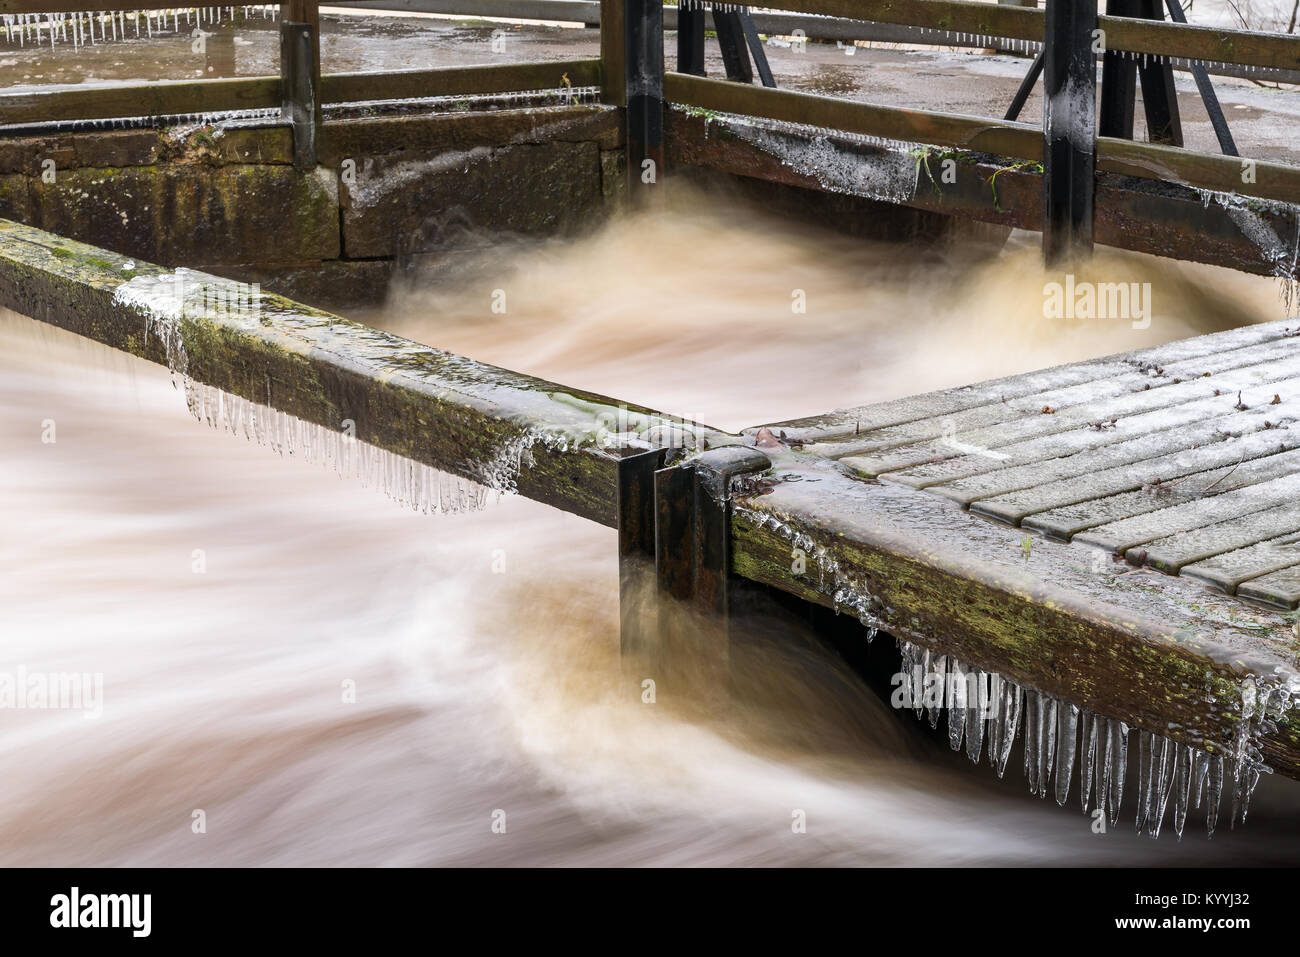 Ice and icicles forming on beams and railings along a violent river. Stock Photo